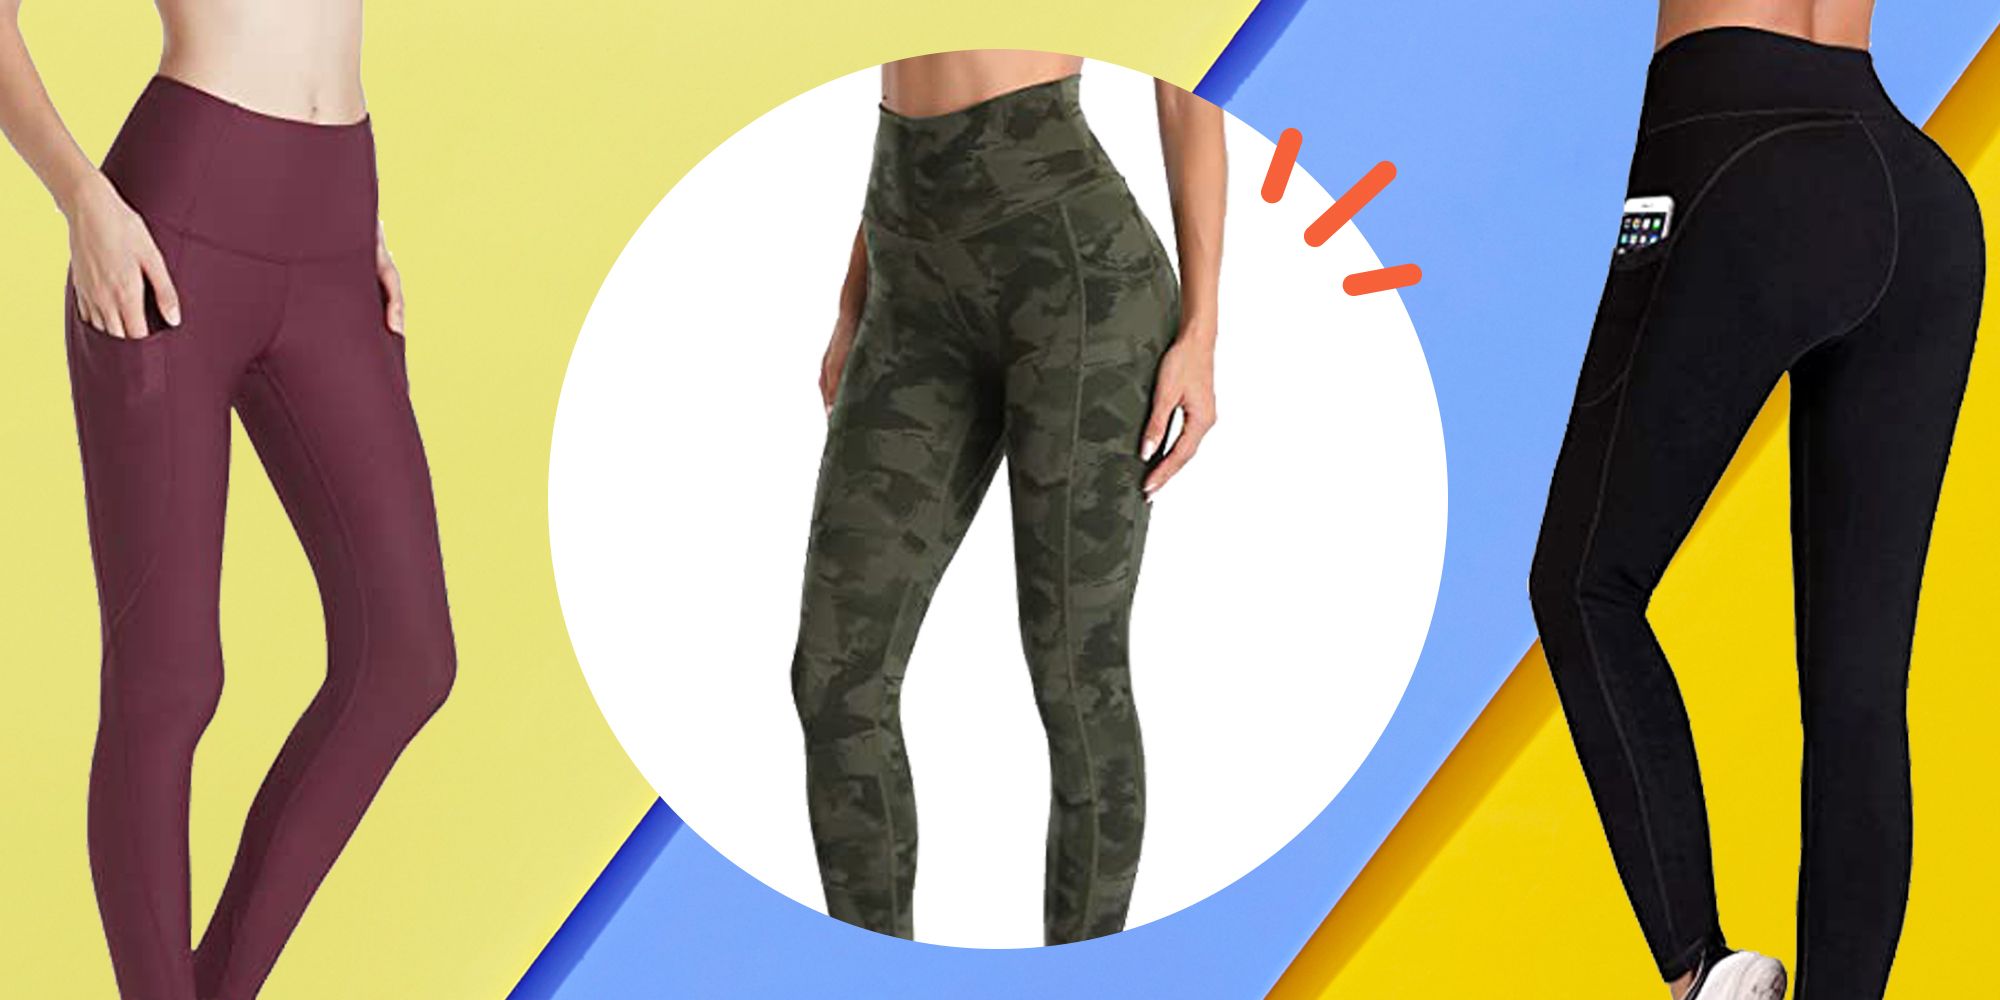 SEEMLY High Waisted Leggings with Pockets Women Workout Leggings for Tummy Control 1 Pair Breathable Yoga Pants 